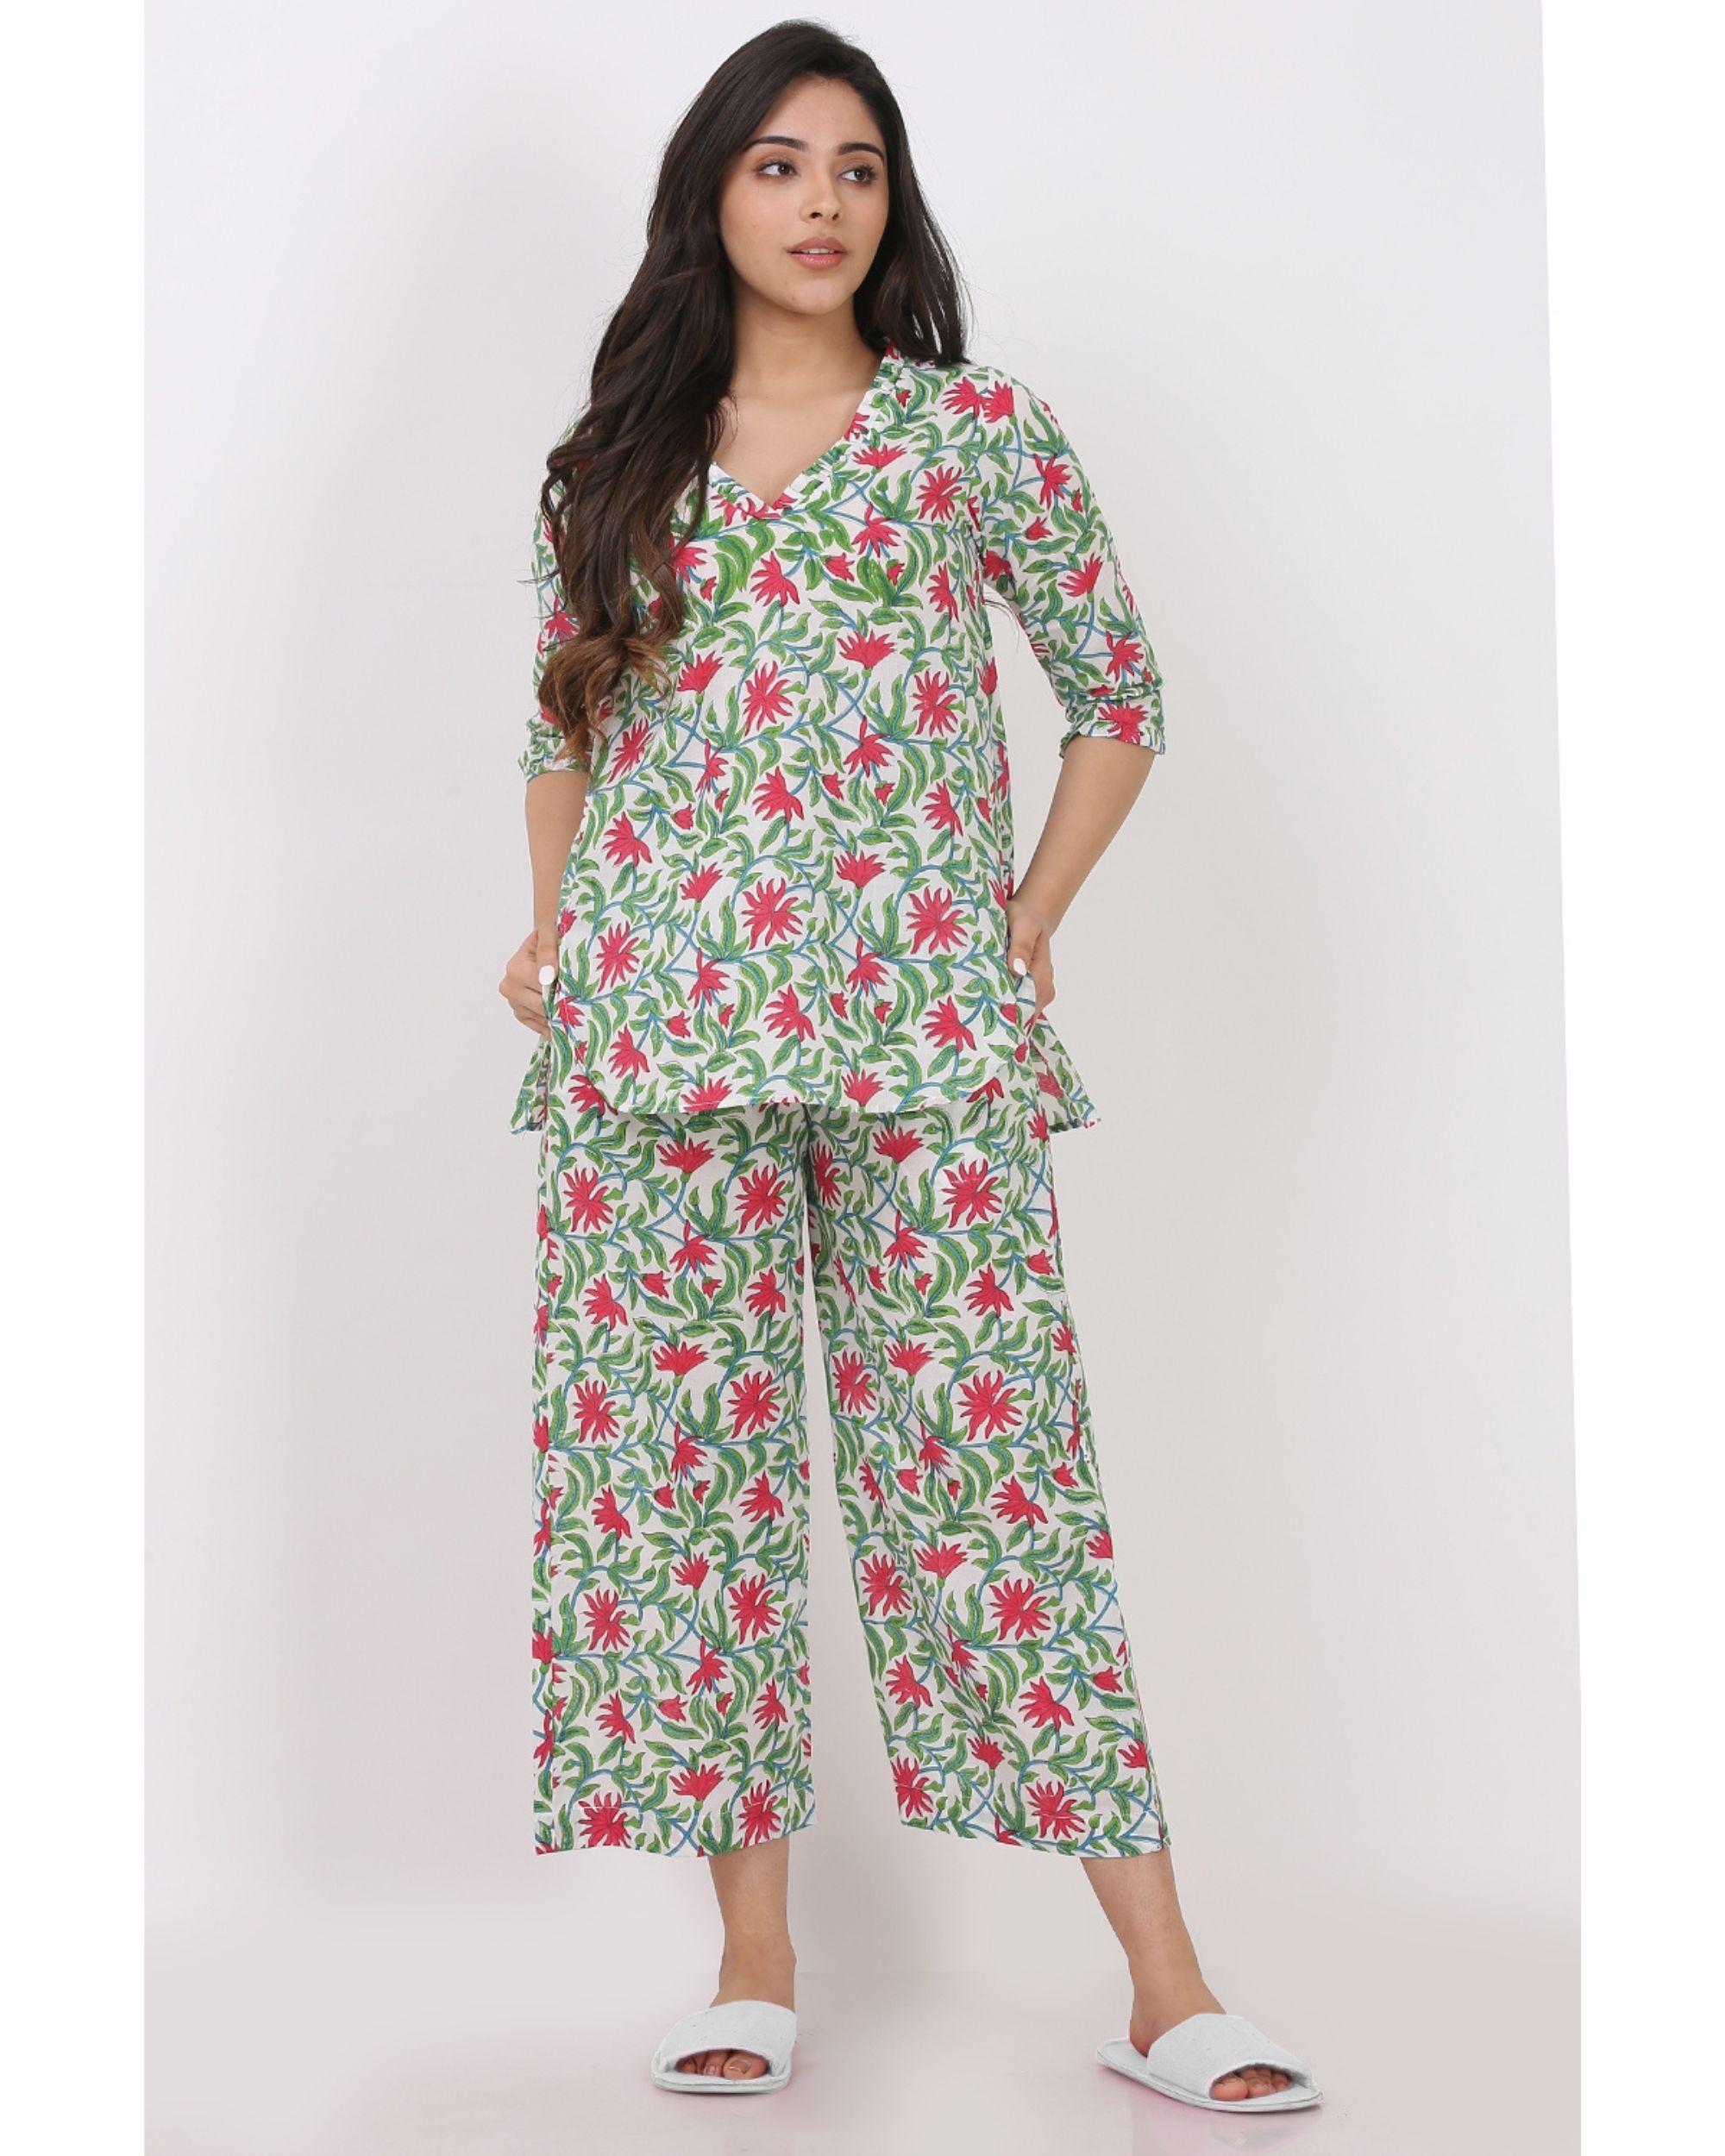 Pista green and red printed top with pants - set of two